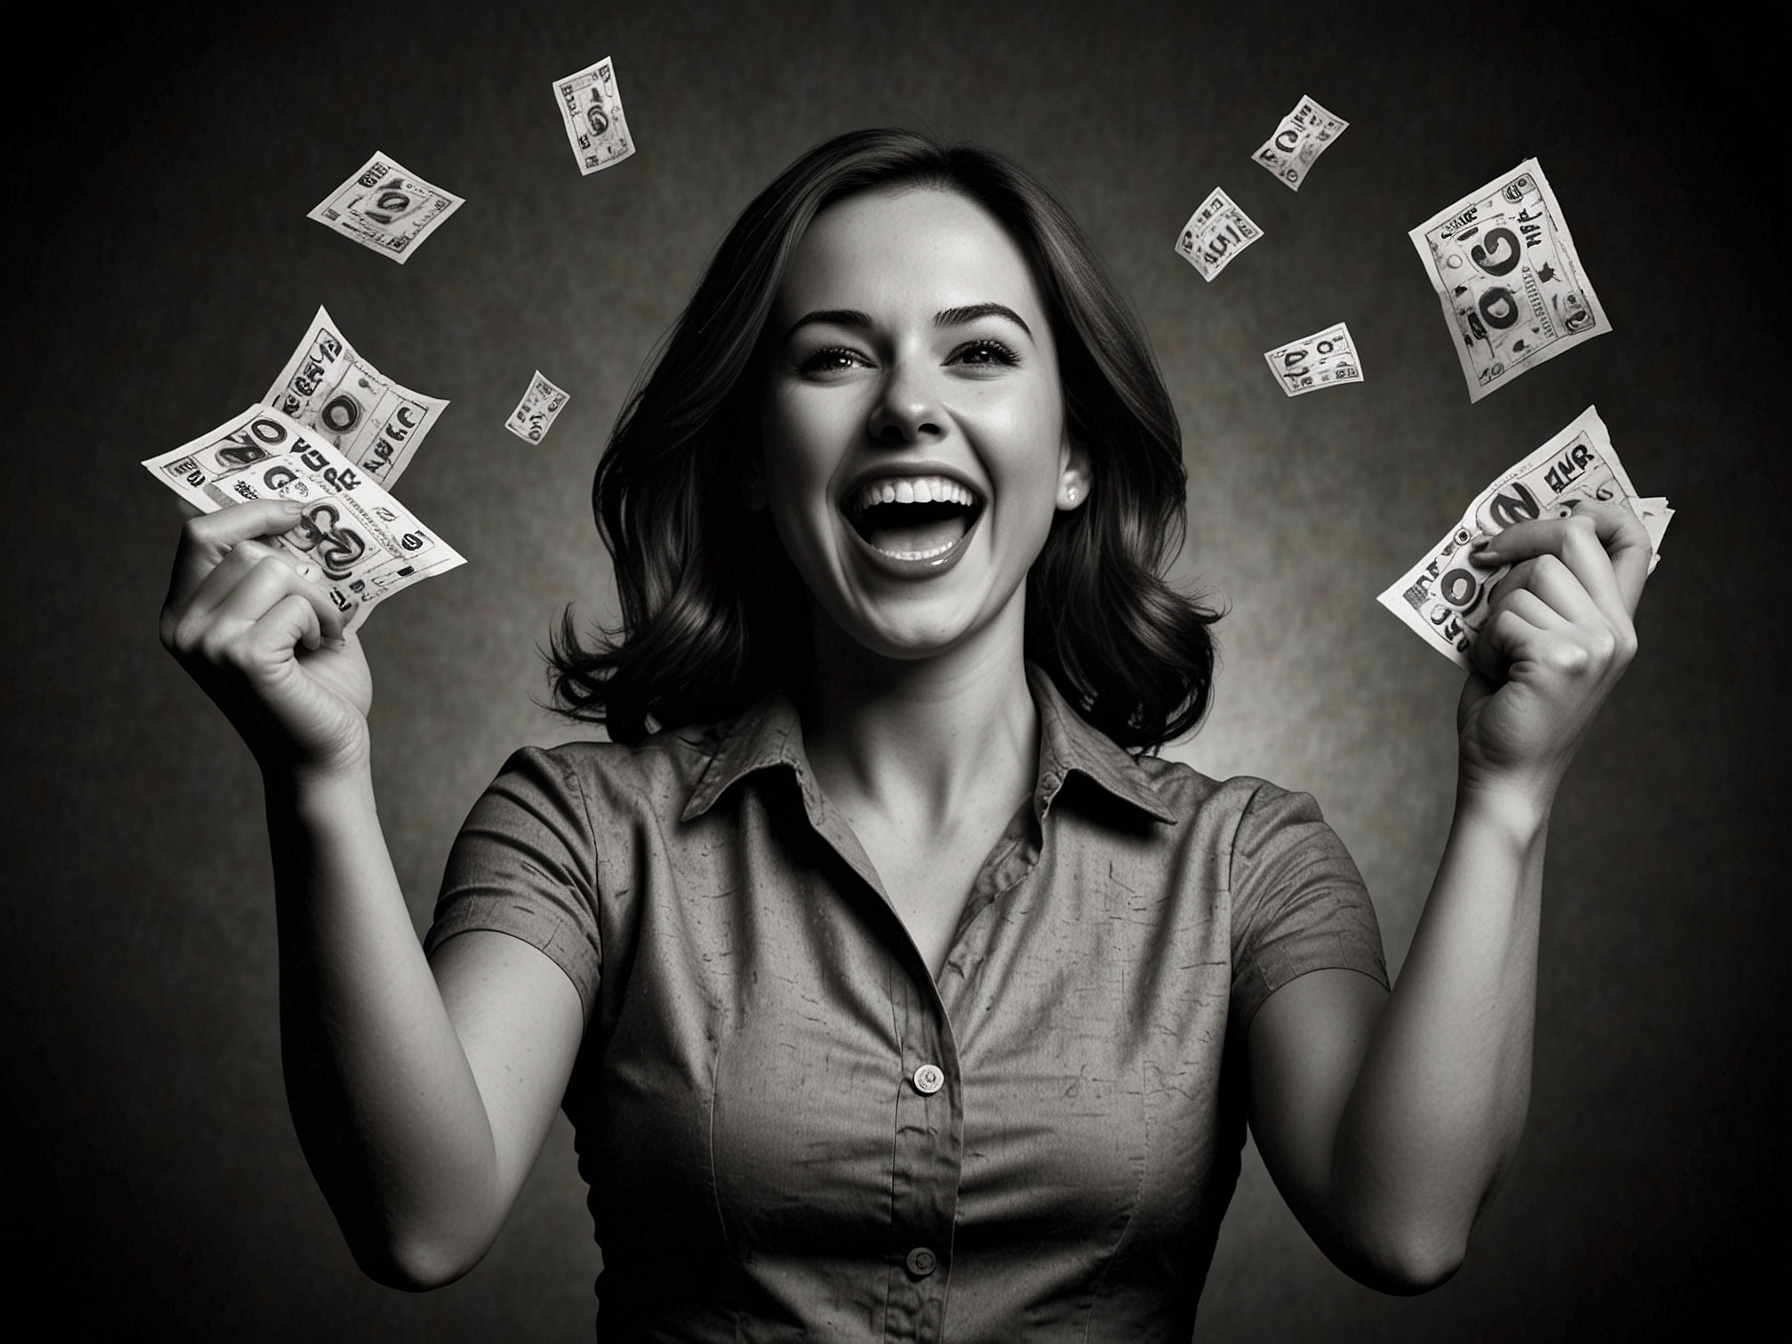 A jubilant lottery player holding her winning tickets, symbolizing the initial excitement and exhilaration of striking it rich with back-to-back wins totaling $500,000.